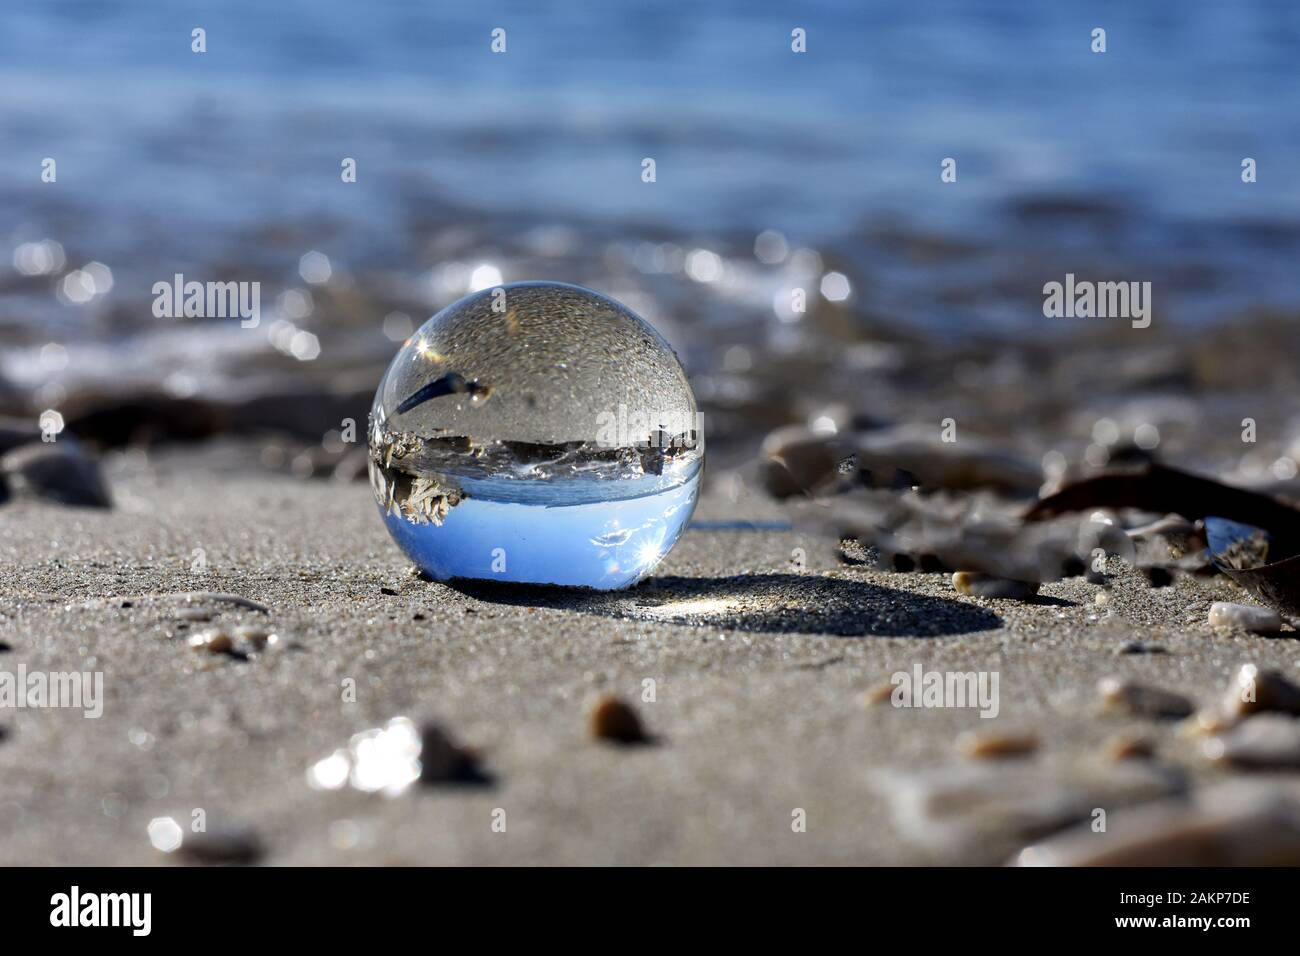 Beautiful transparent glass balls at the beach flips the view upside down/ beautiful landscape nature photography Stock Photo